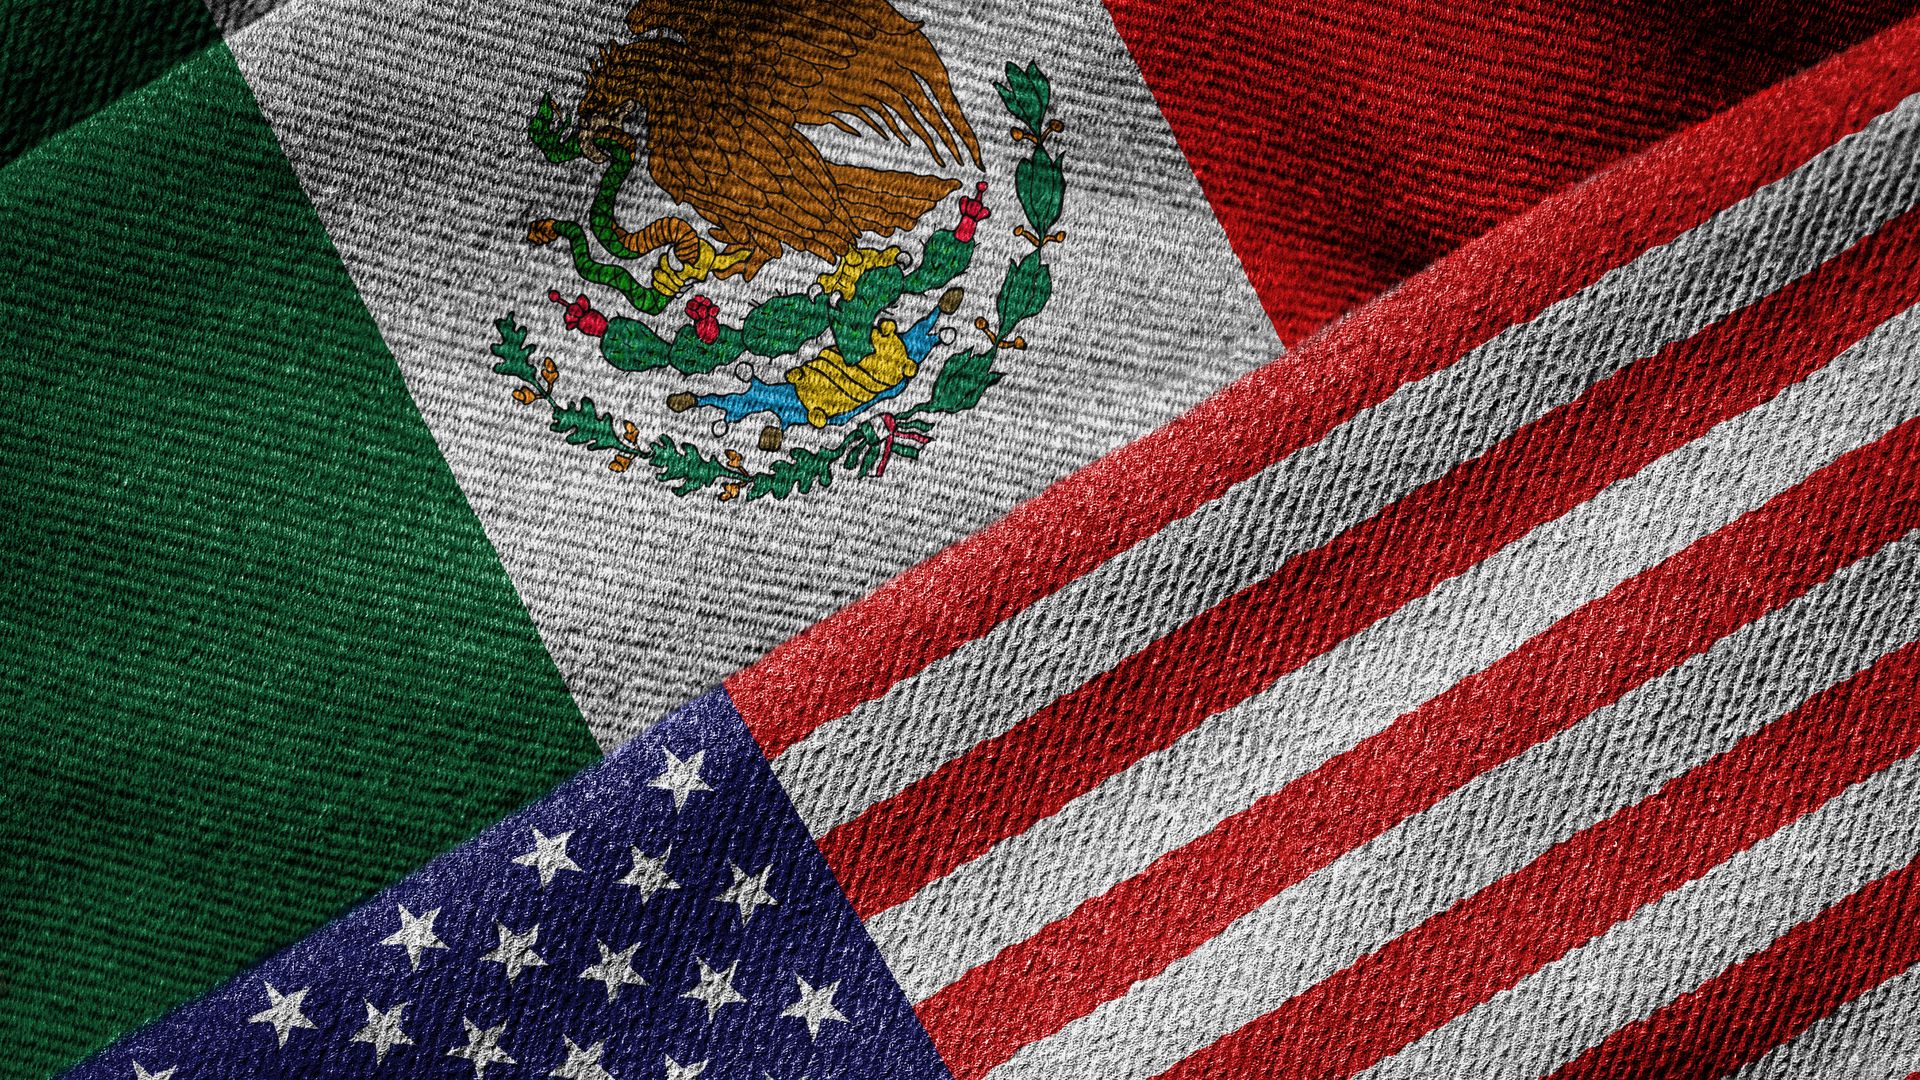 Mexican and American flags side by side